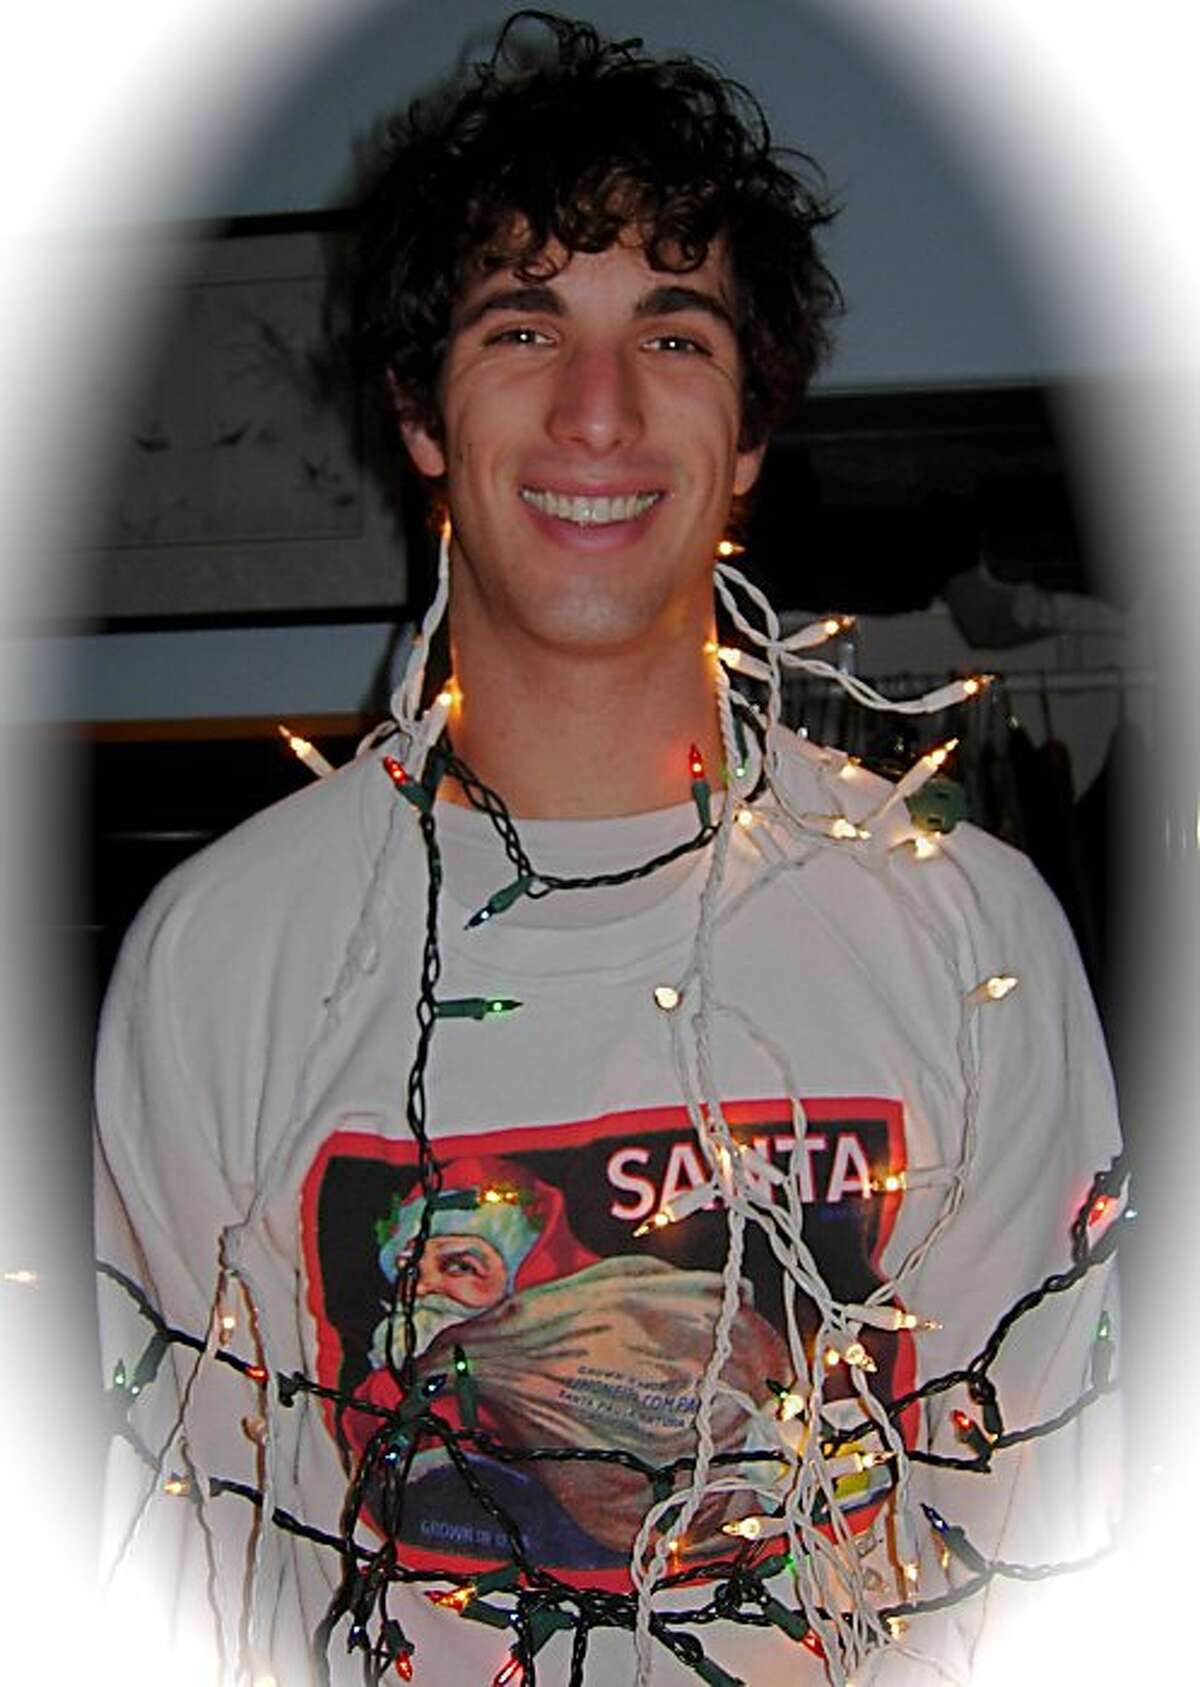 John Gibson shows his festive side during a visit home last Christmas.